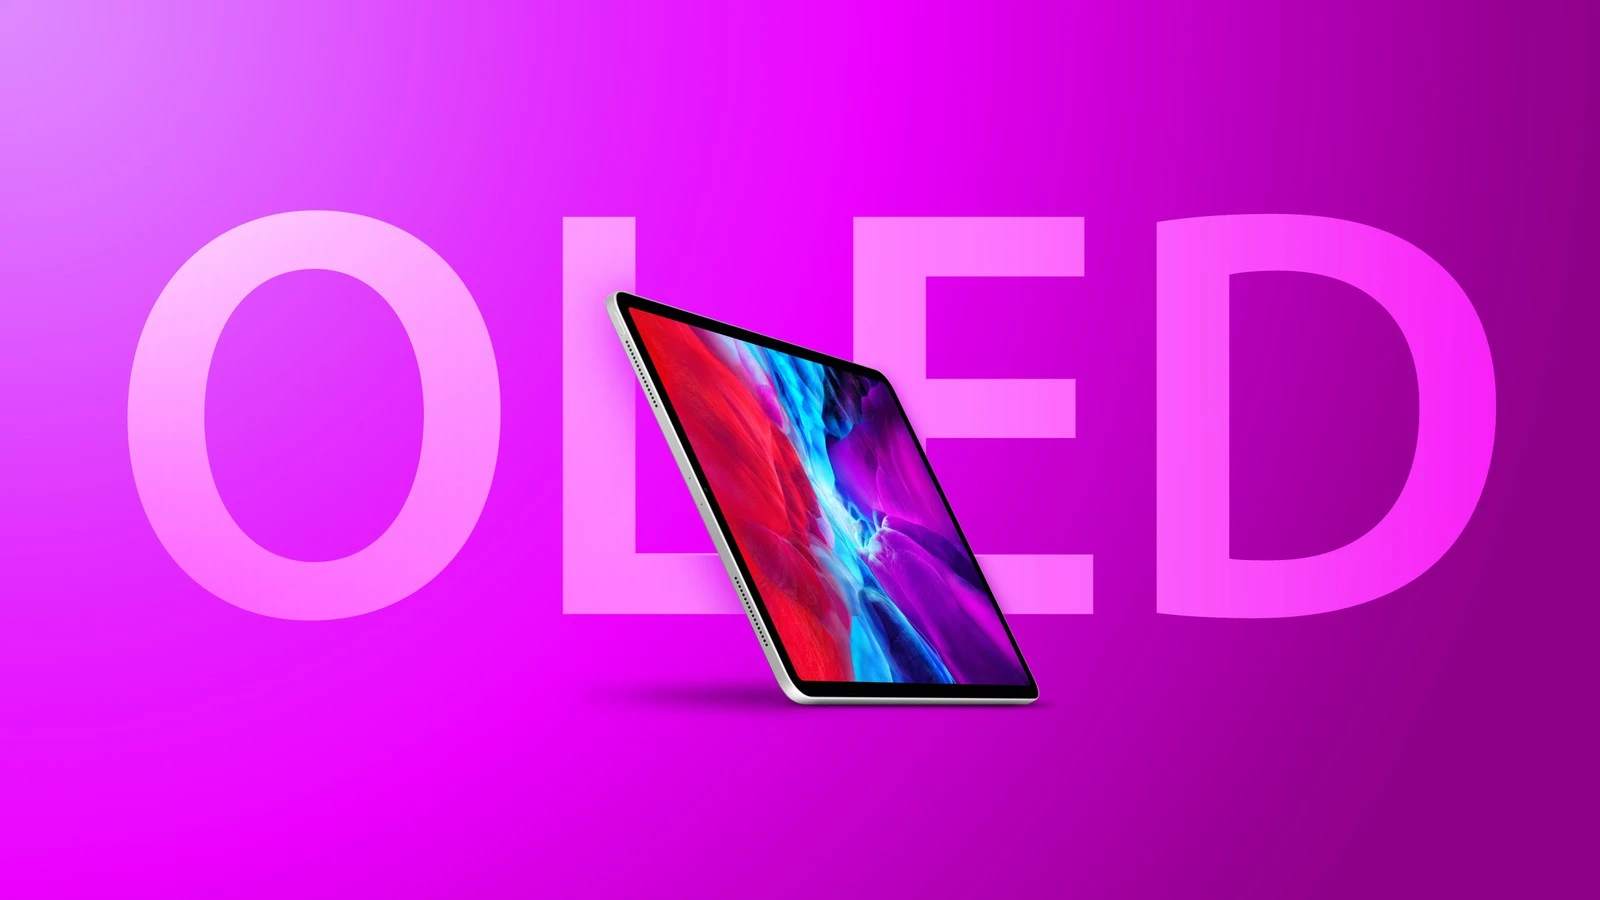 The next iPad Pros will have an OLED thumbnail display